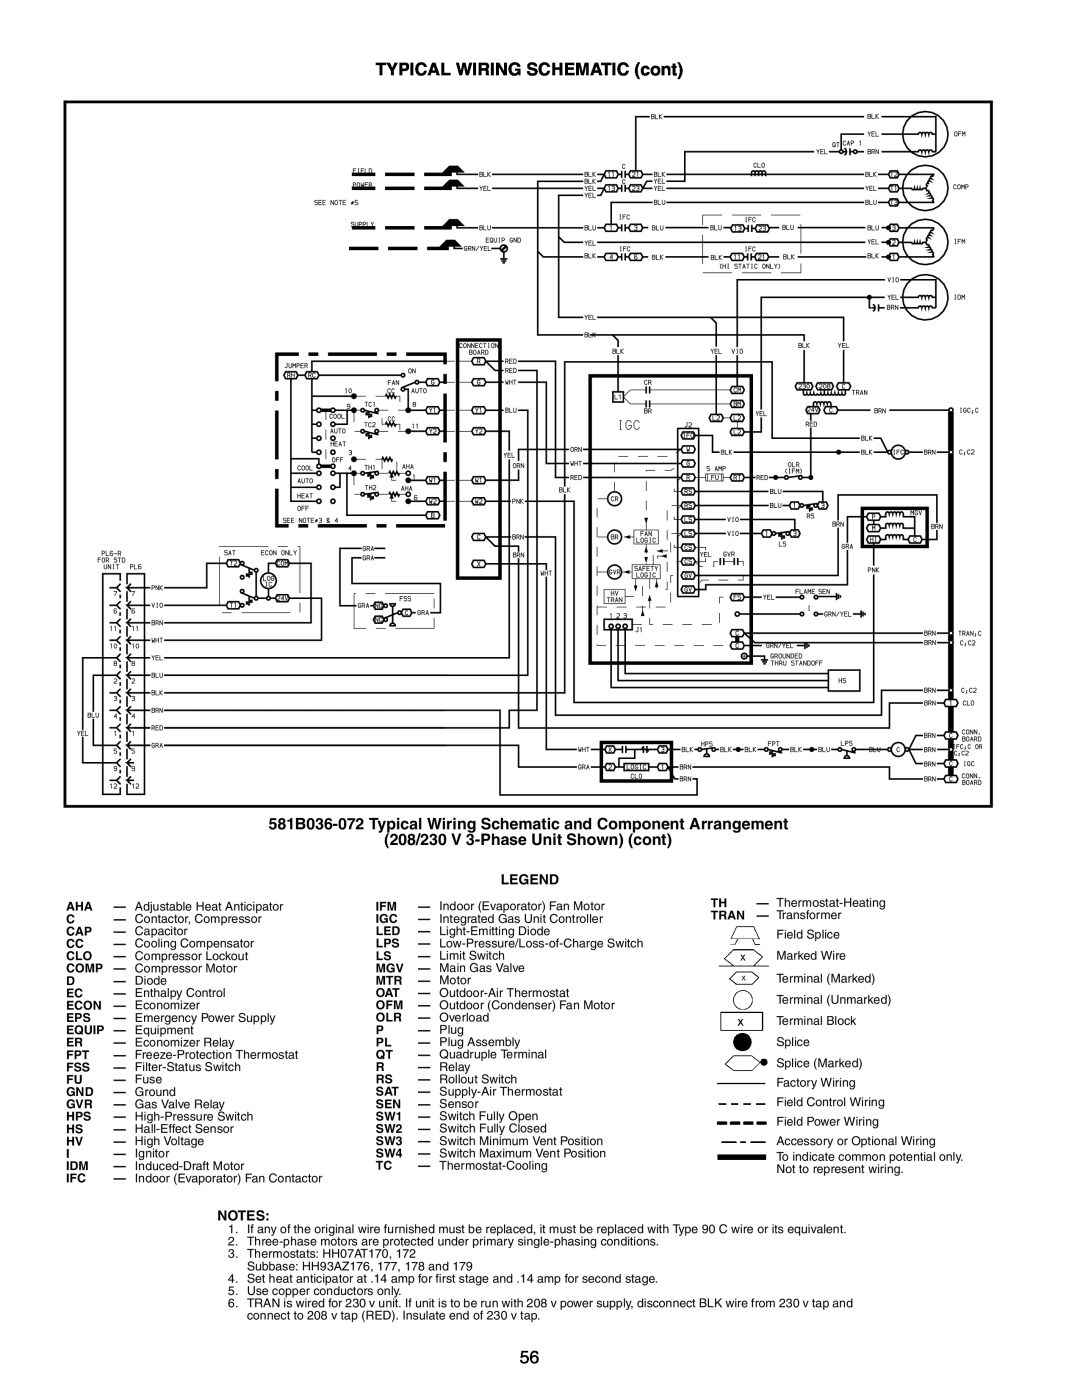 Bryant 581B manual TYPICAL WIRING SCHEMATIC cont, 208/230 V 3-PhaseUnit Shown cont 